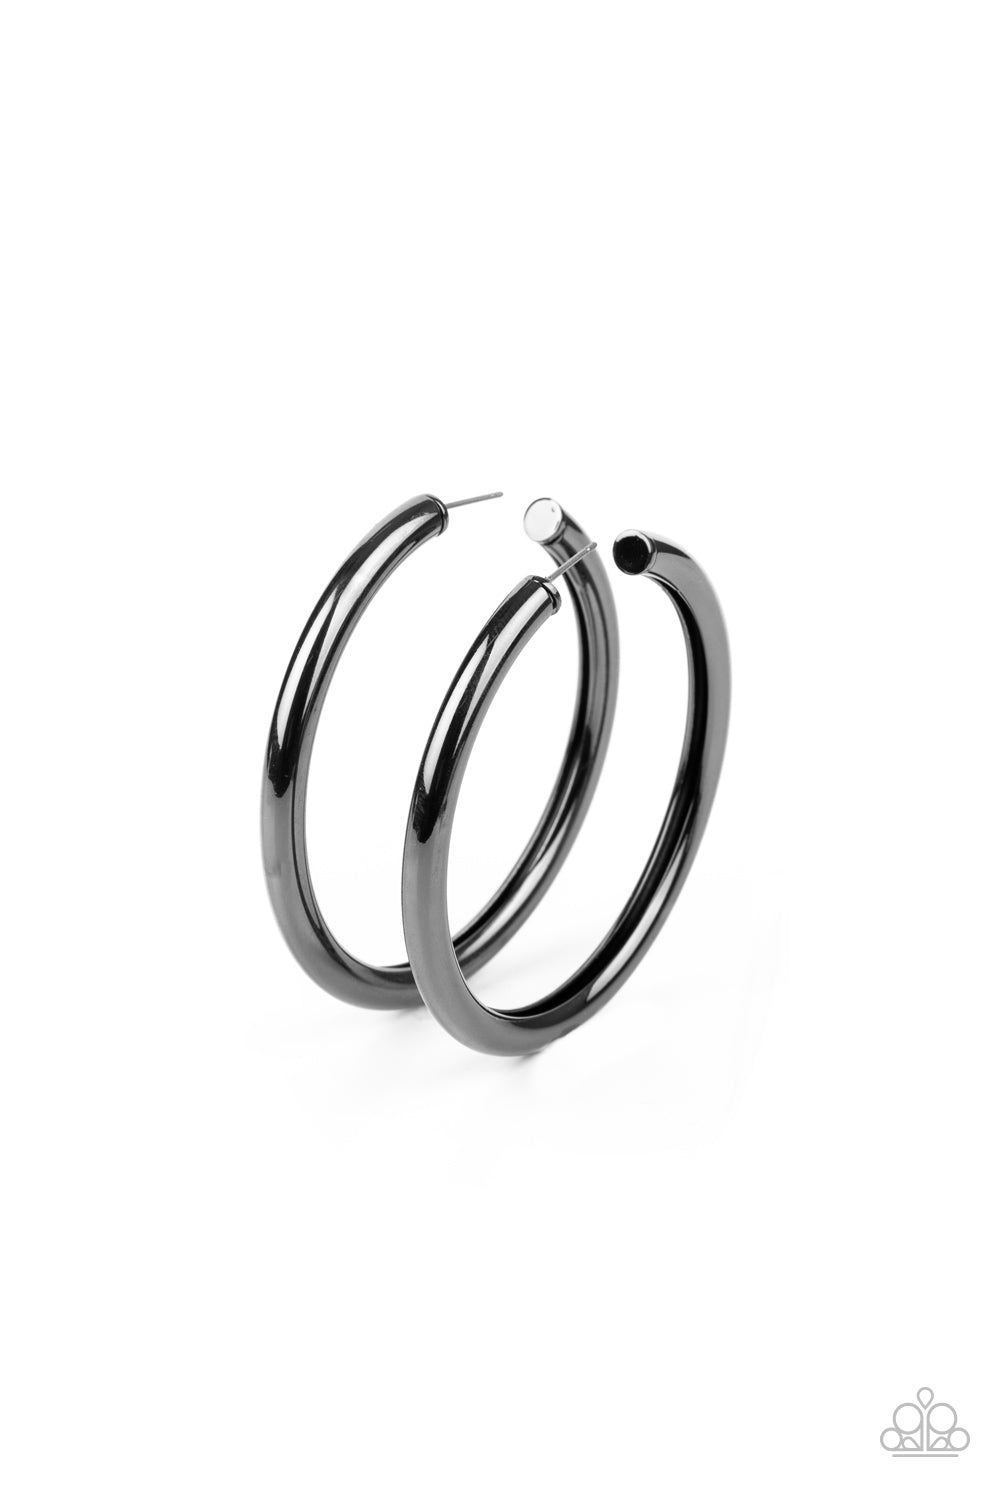 Curve Ball Black Hoop Earring - Paparazzi Accessories  A thick gunmetal bar delicately curls into a glistening oversized hoop for a retro look. Earring attaches to a standard post fitting. Hoop measures approximately 2 1/4" in diameter.  ﻿All Paparazzi Accessories are lead free and nickel free!  Sold as one pair of hoop earrings.